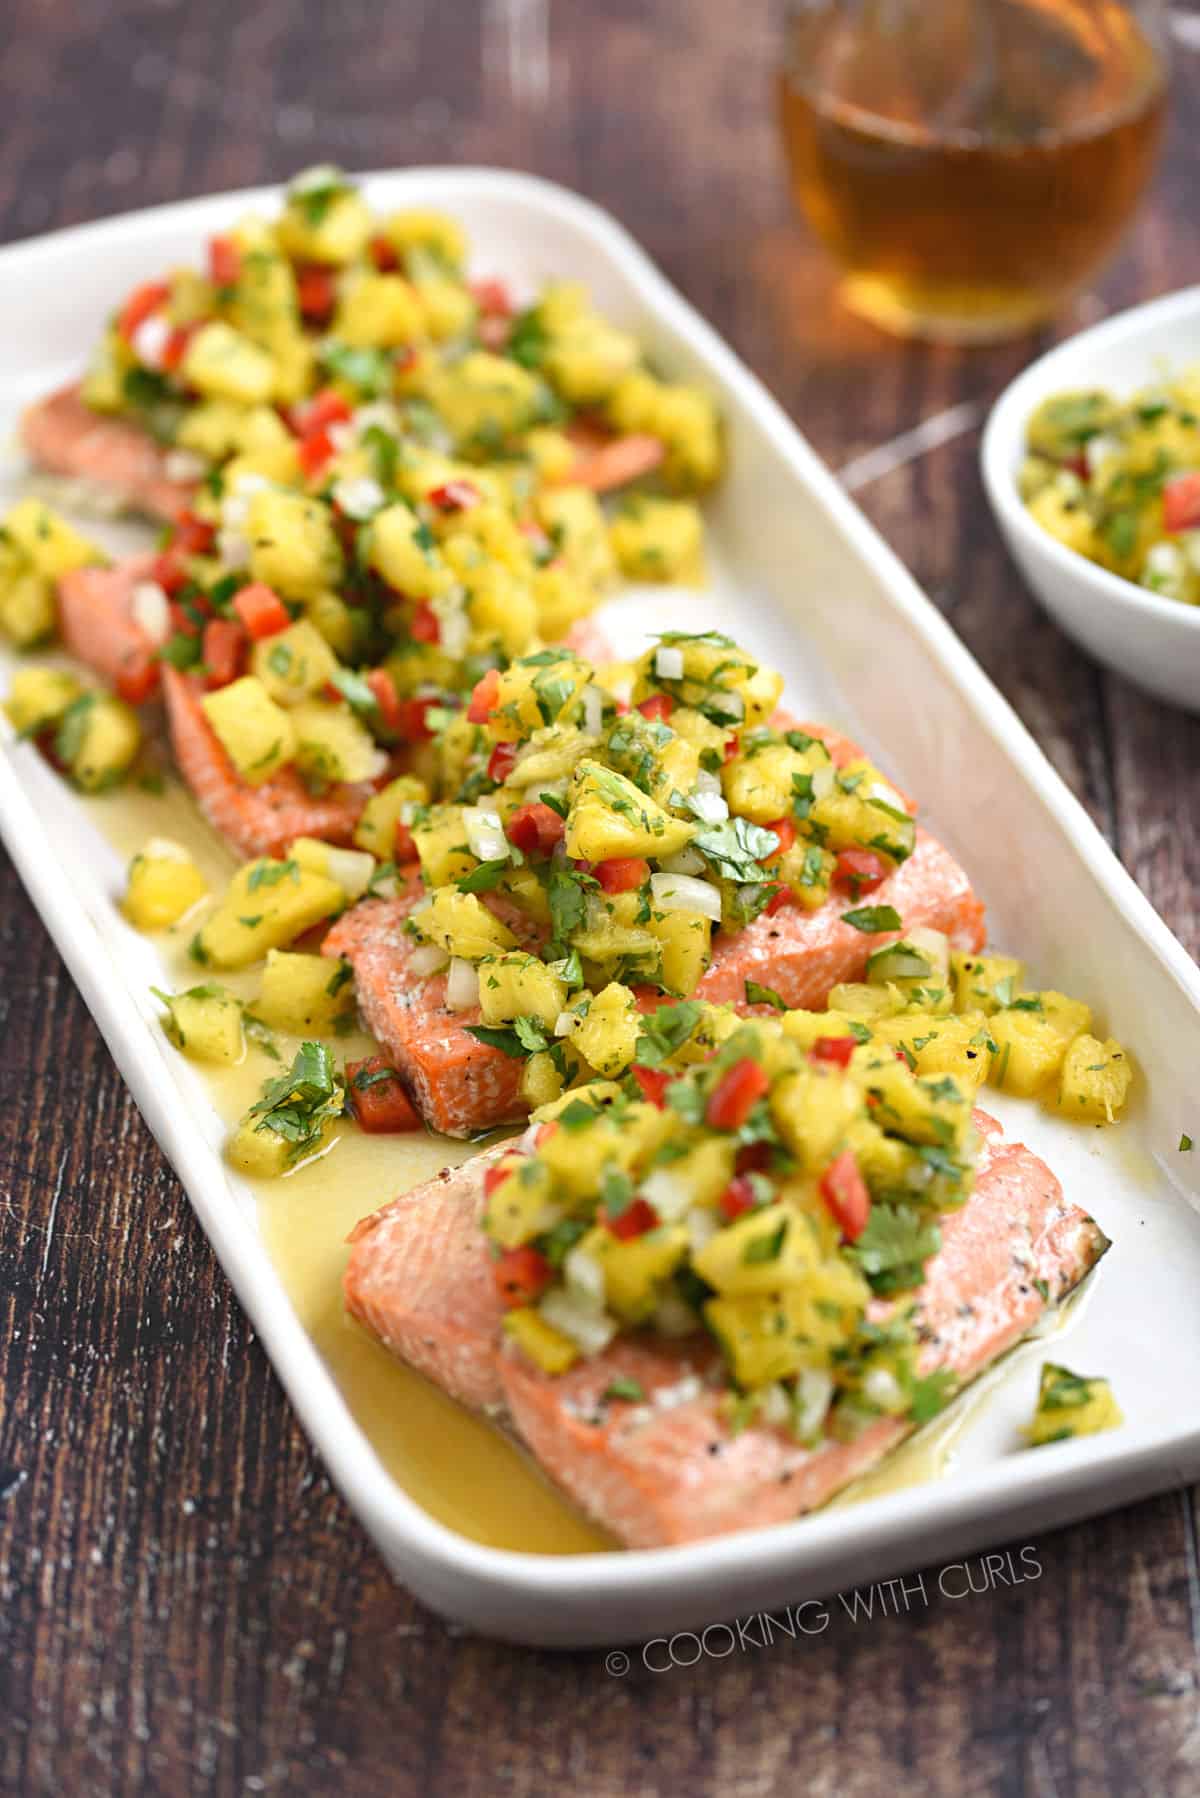 Four salmon filets topped with pineapple salsa on a white platter witha  glass of wine and bowl of salsa in the background.